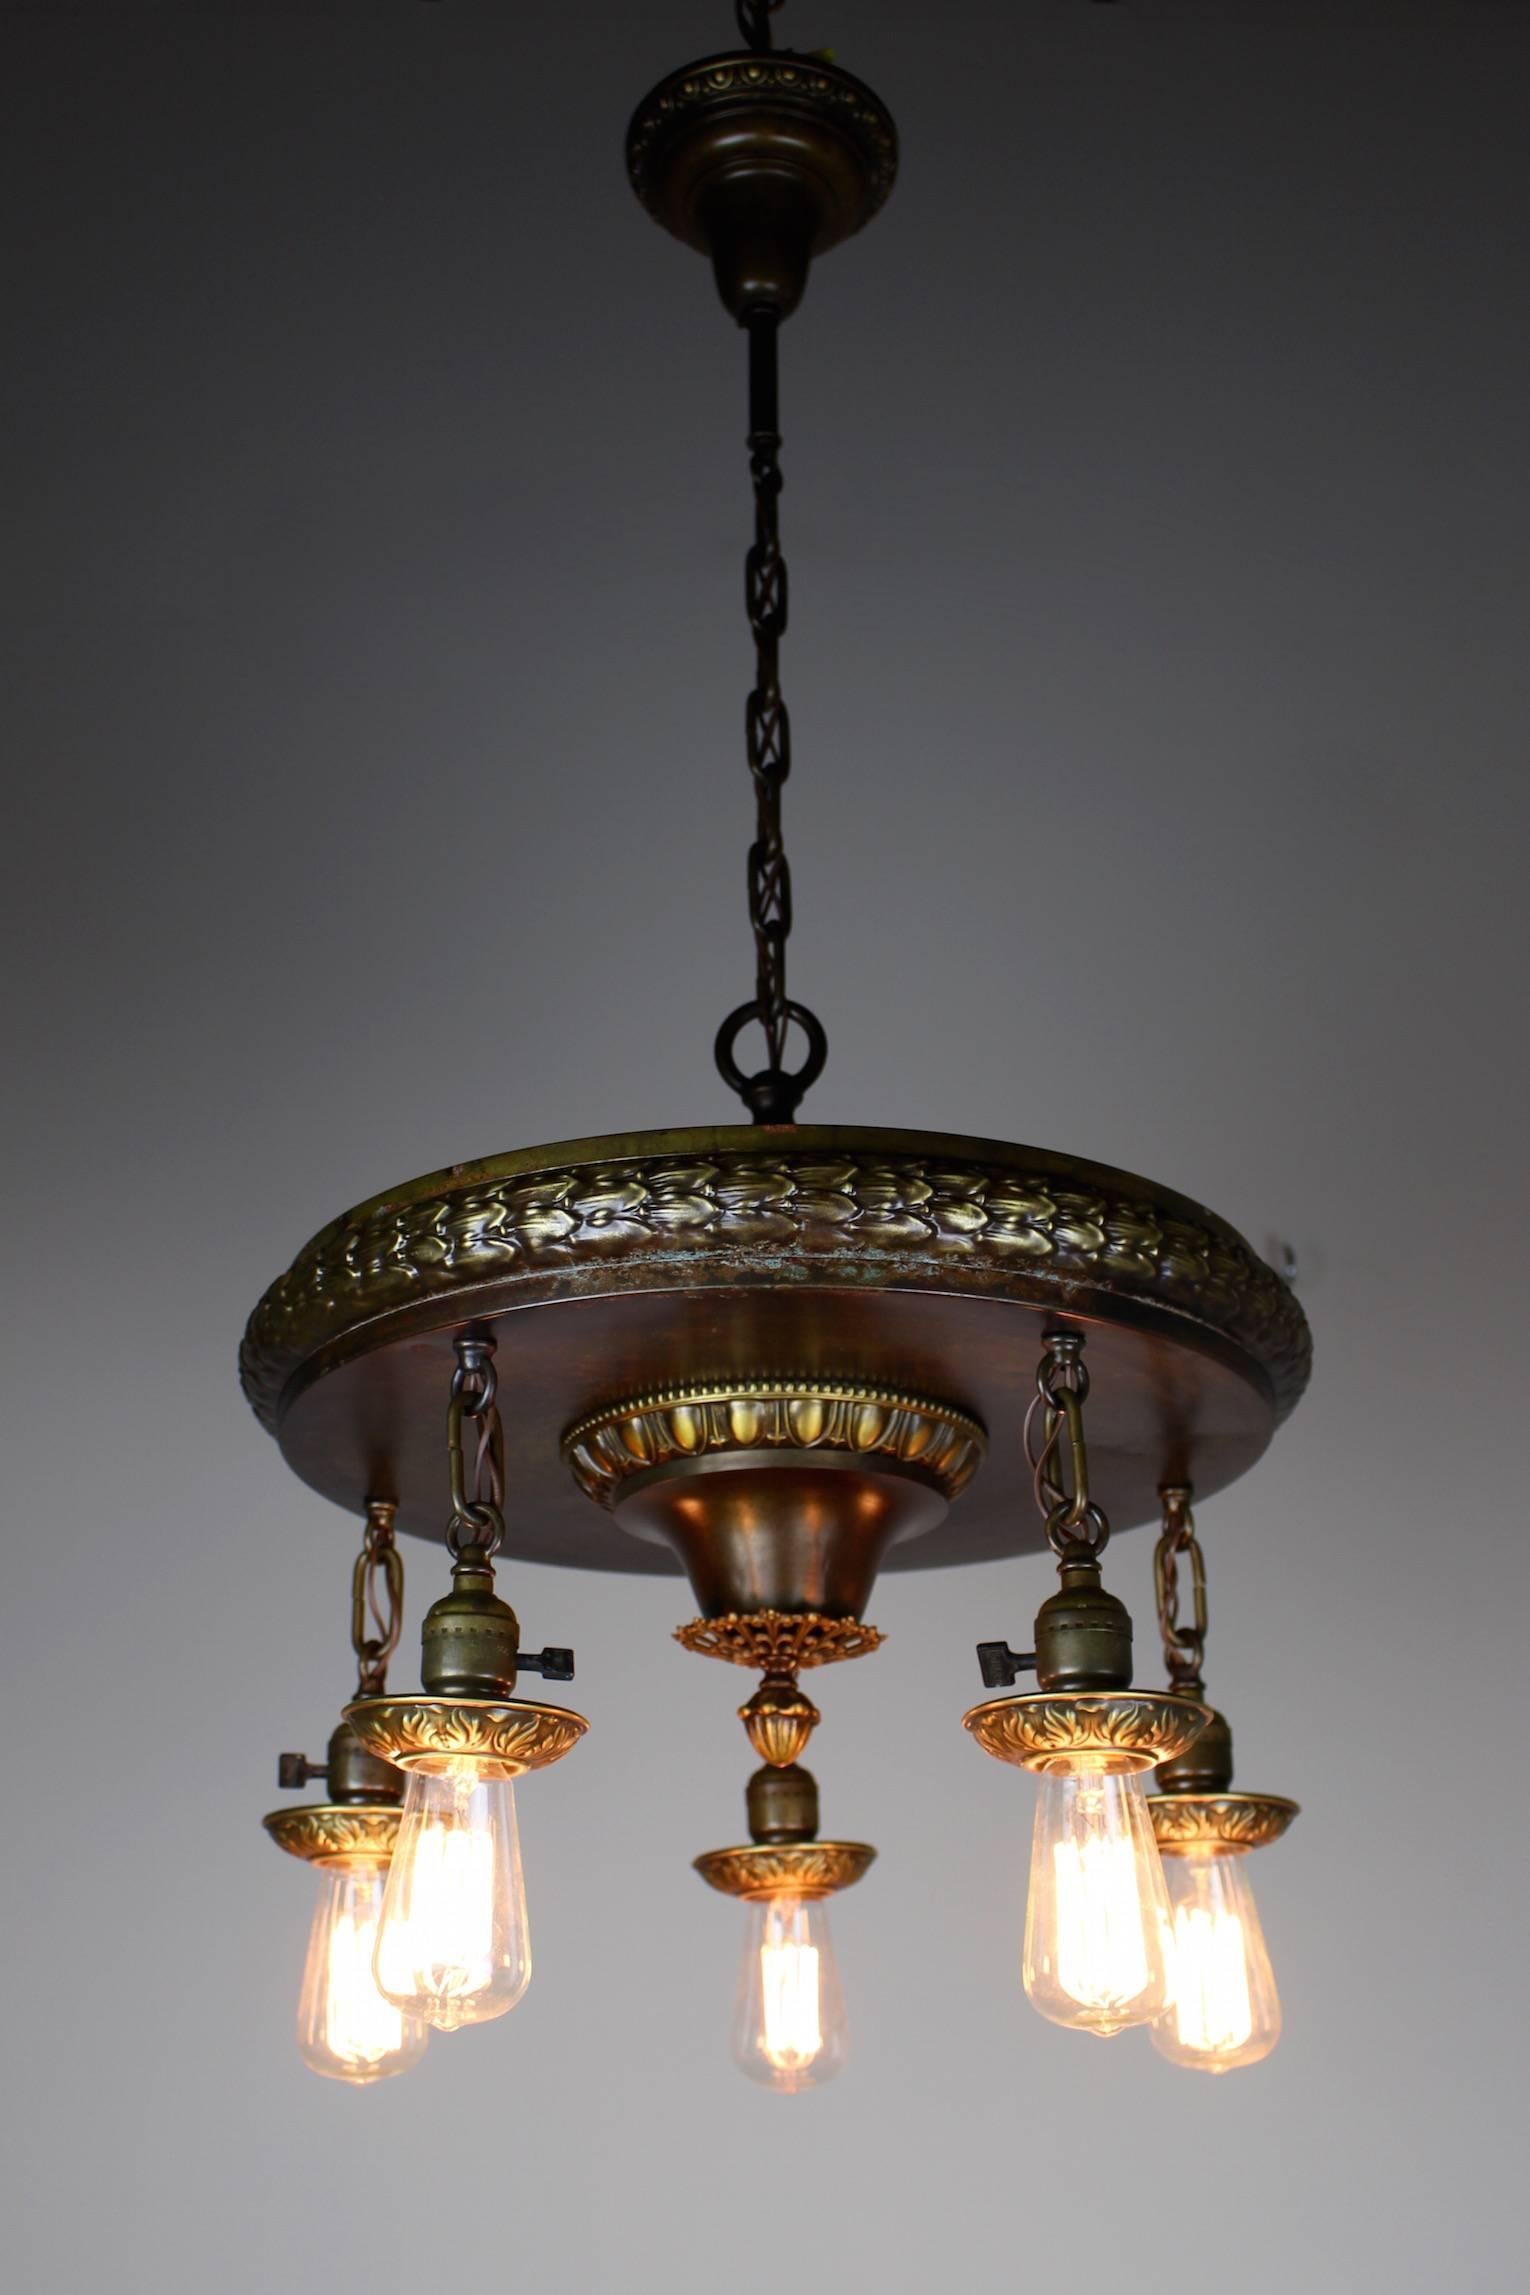 Early 20th Century 1920s Five-Light Neoclassical Revival Dining Room Fixture For Sale